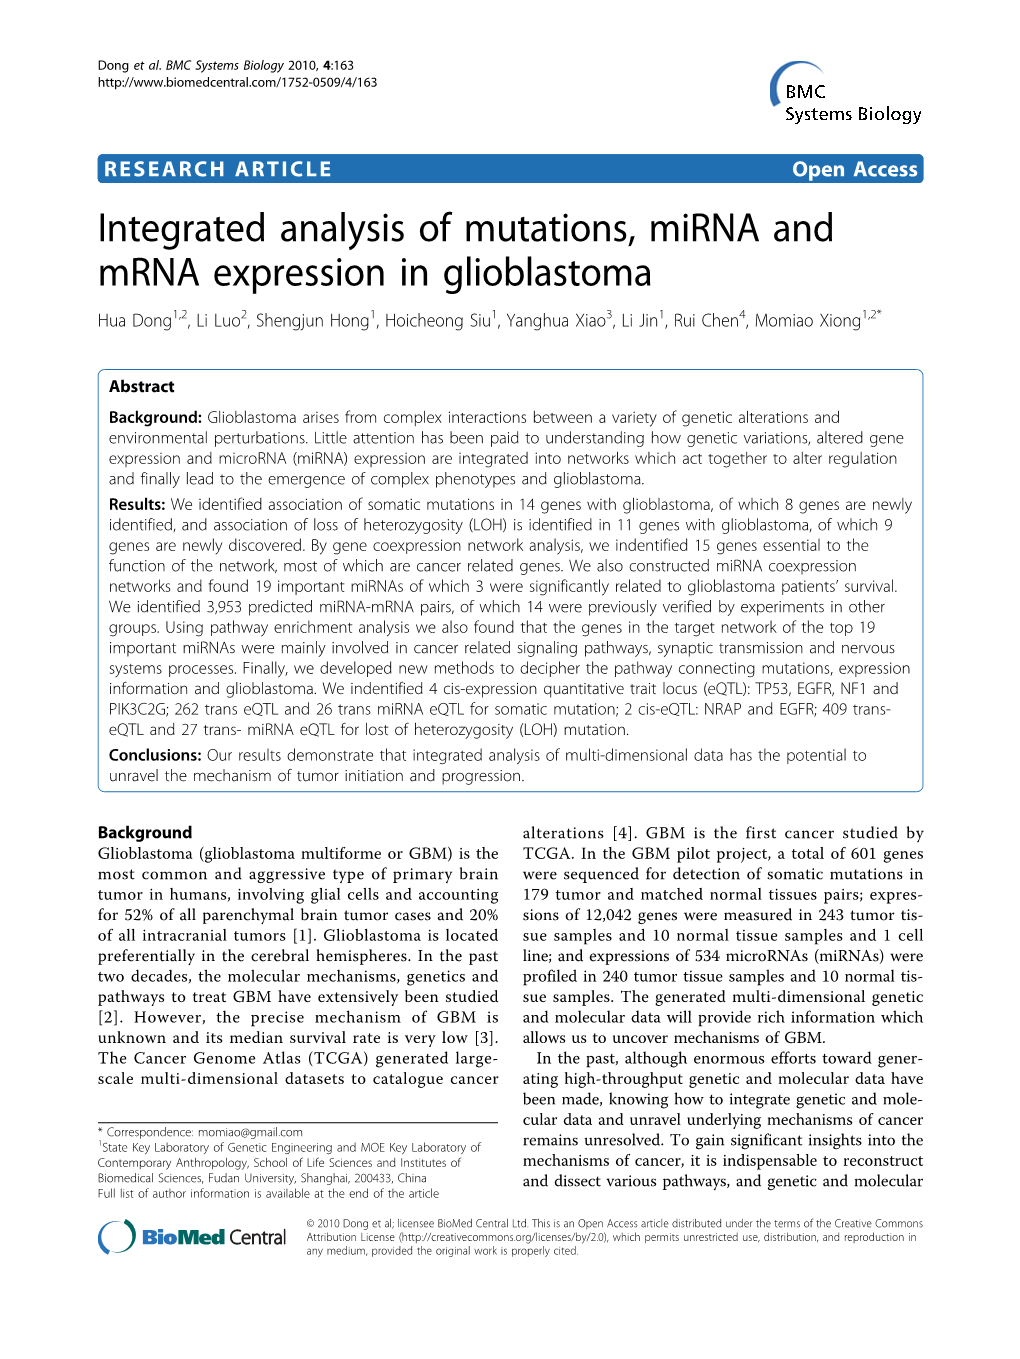 Integrated Analysis of Mutations, Mirna and Mrna Expression In